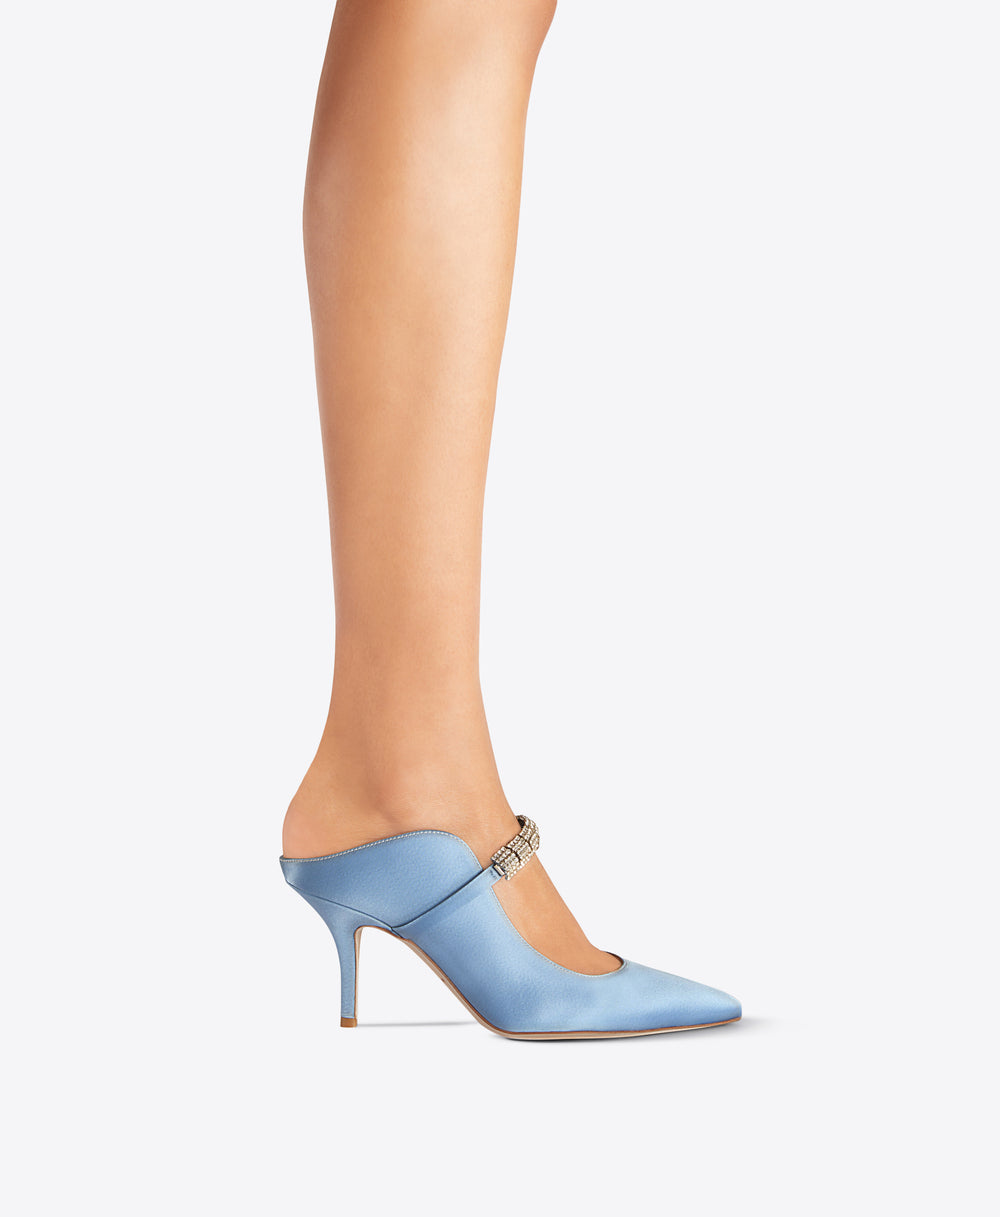 Women's  Baby Blue Satin Crystal Heeled Mules Malone Souliers